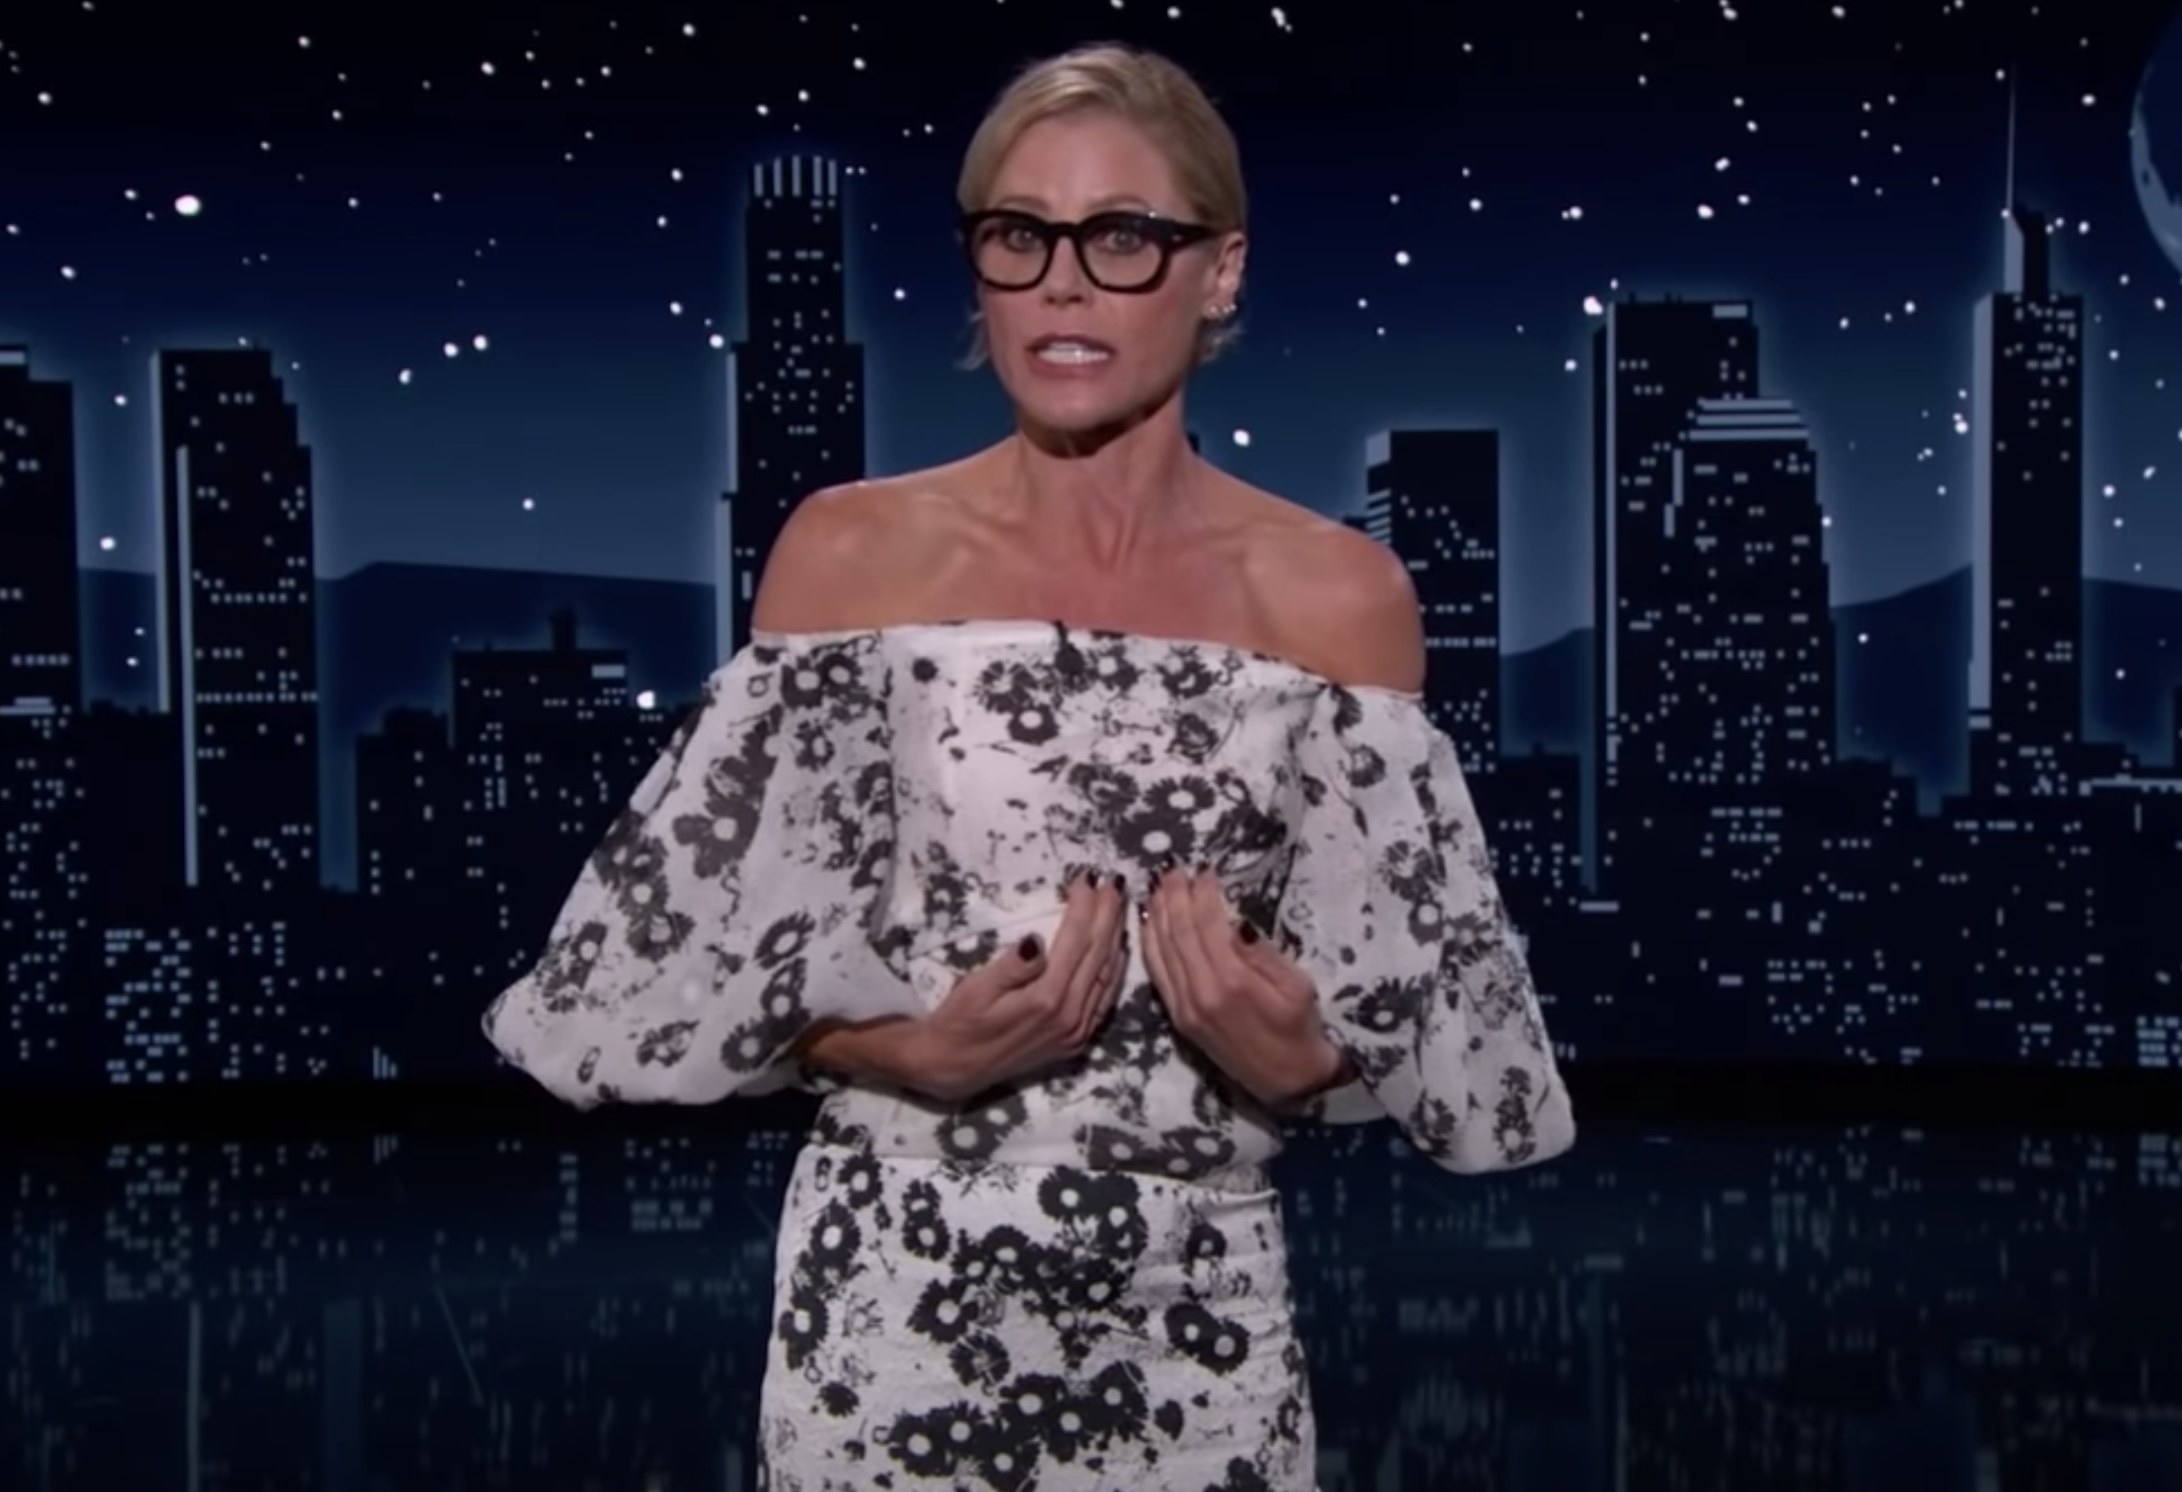 Julie wearing dark-framed glasses and an off-the-shoulder outfit as guest host of Jimmy Kimmel Live